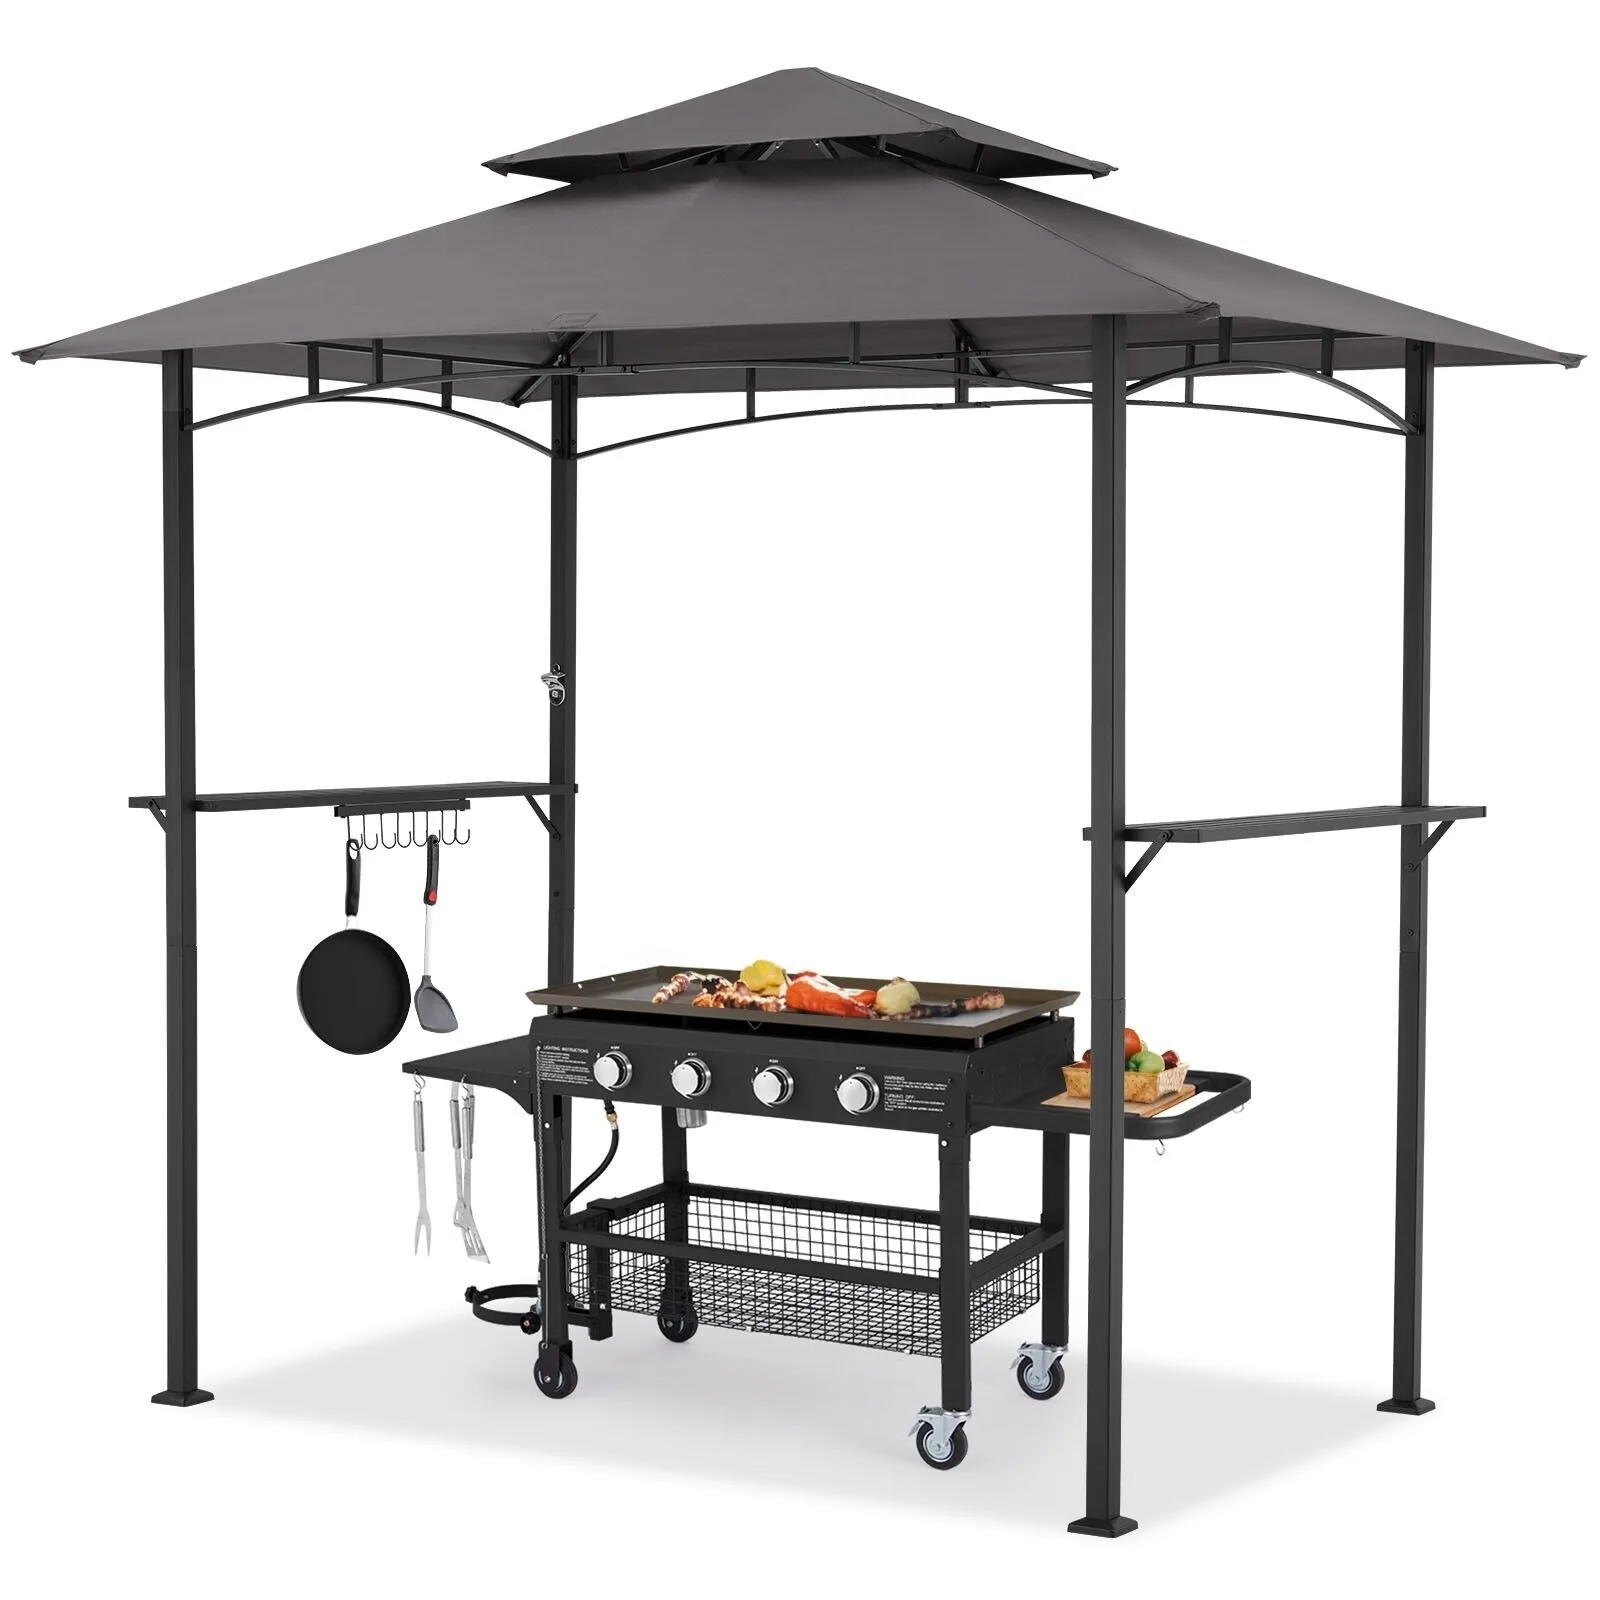 

US 8'x 5' Outdoor Grill Gazebo Barbecue Canopy BBQ Grill Tent w/ Shelves&Hooks Grey